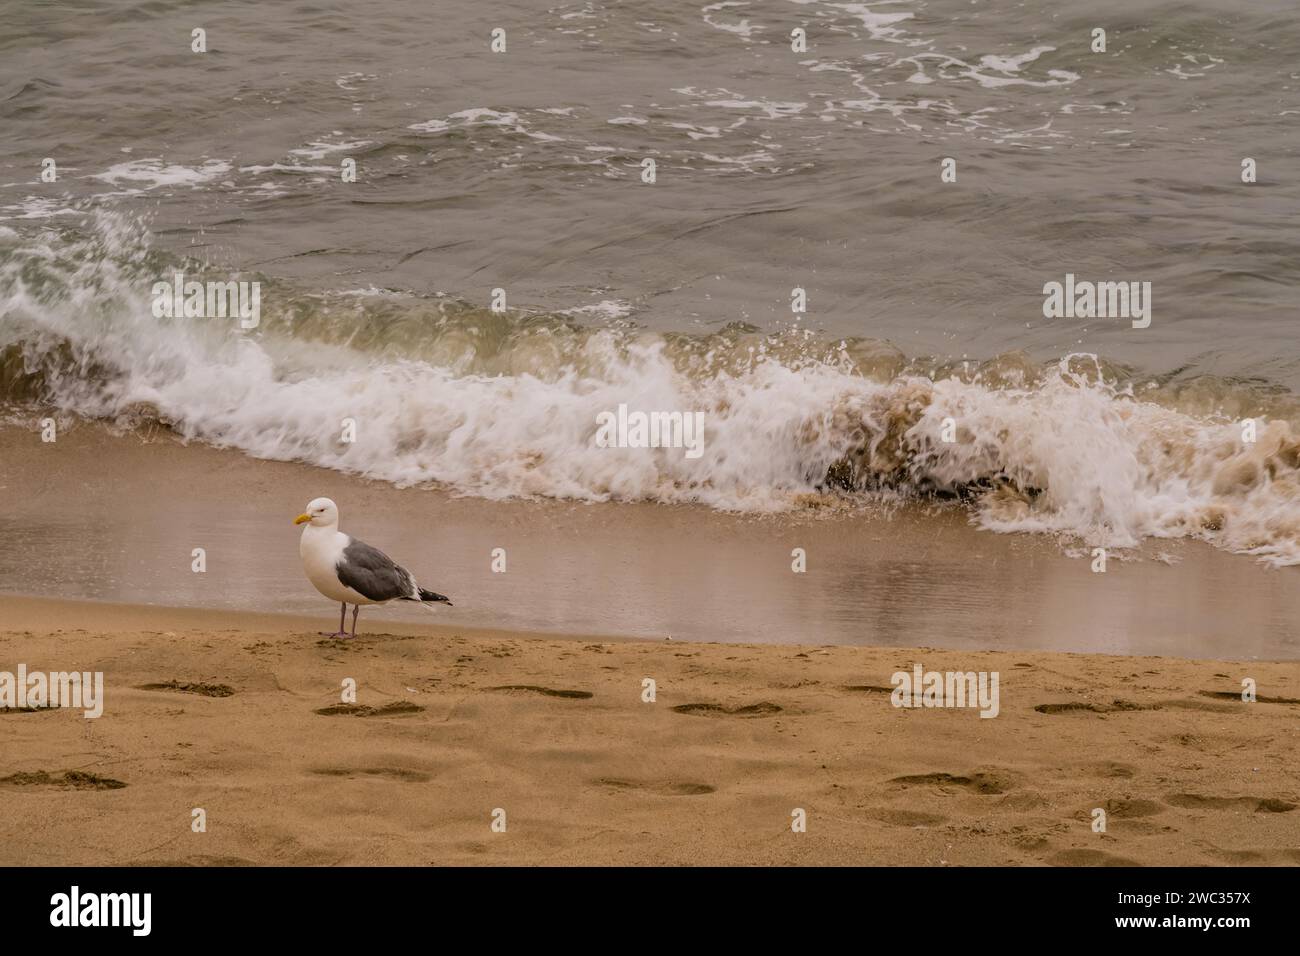 One seagull standing alone on sandy beach next to water's edge Stock Photo